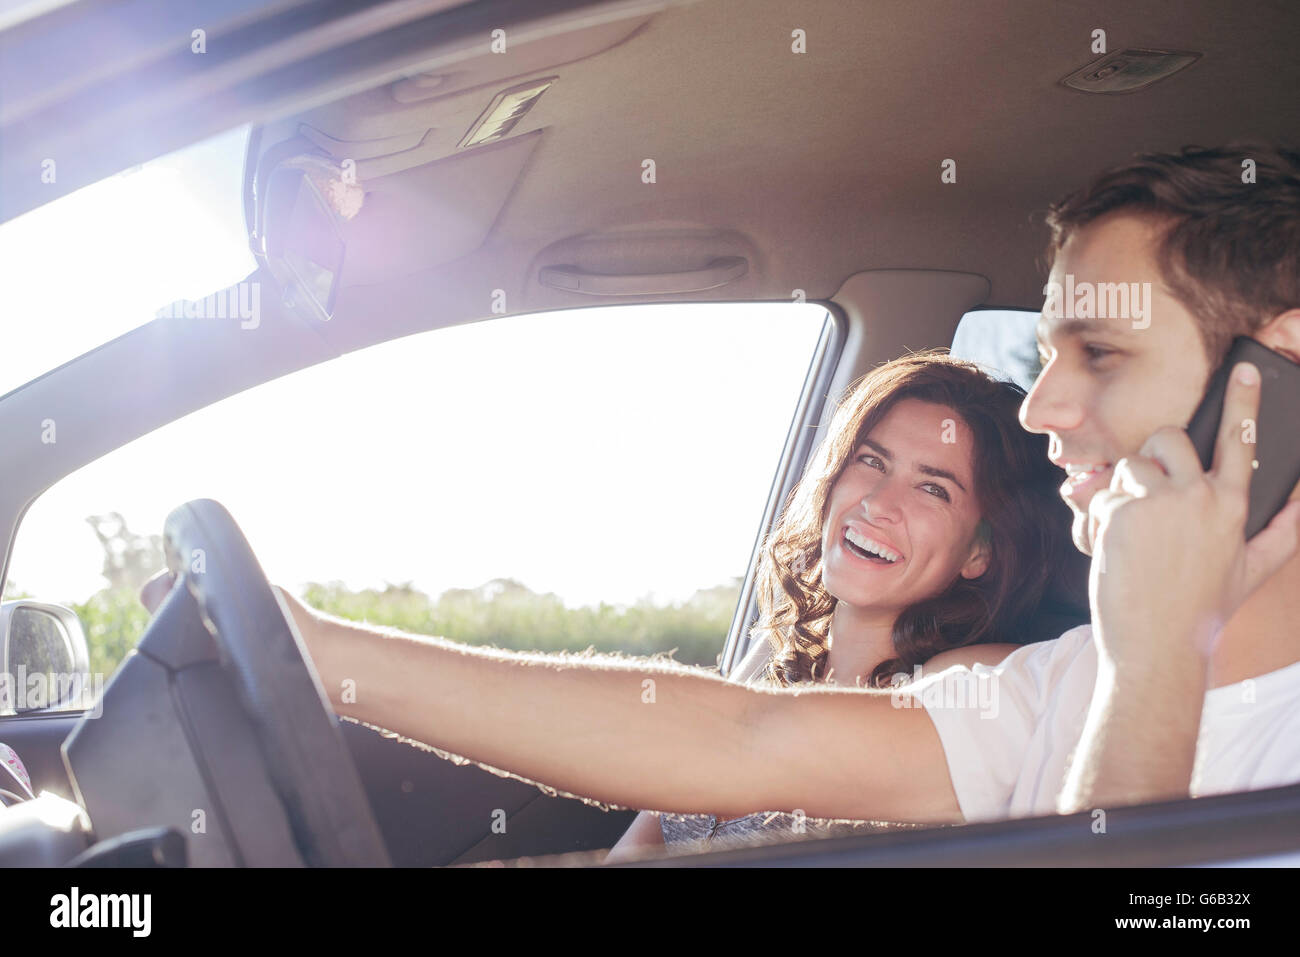 Couple riding in car together while driver chats on cell phone without hands-free device Stock Photo